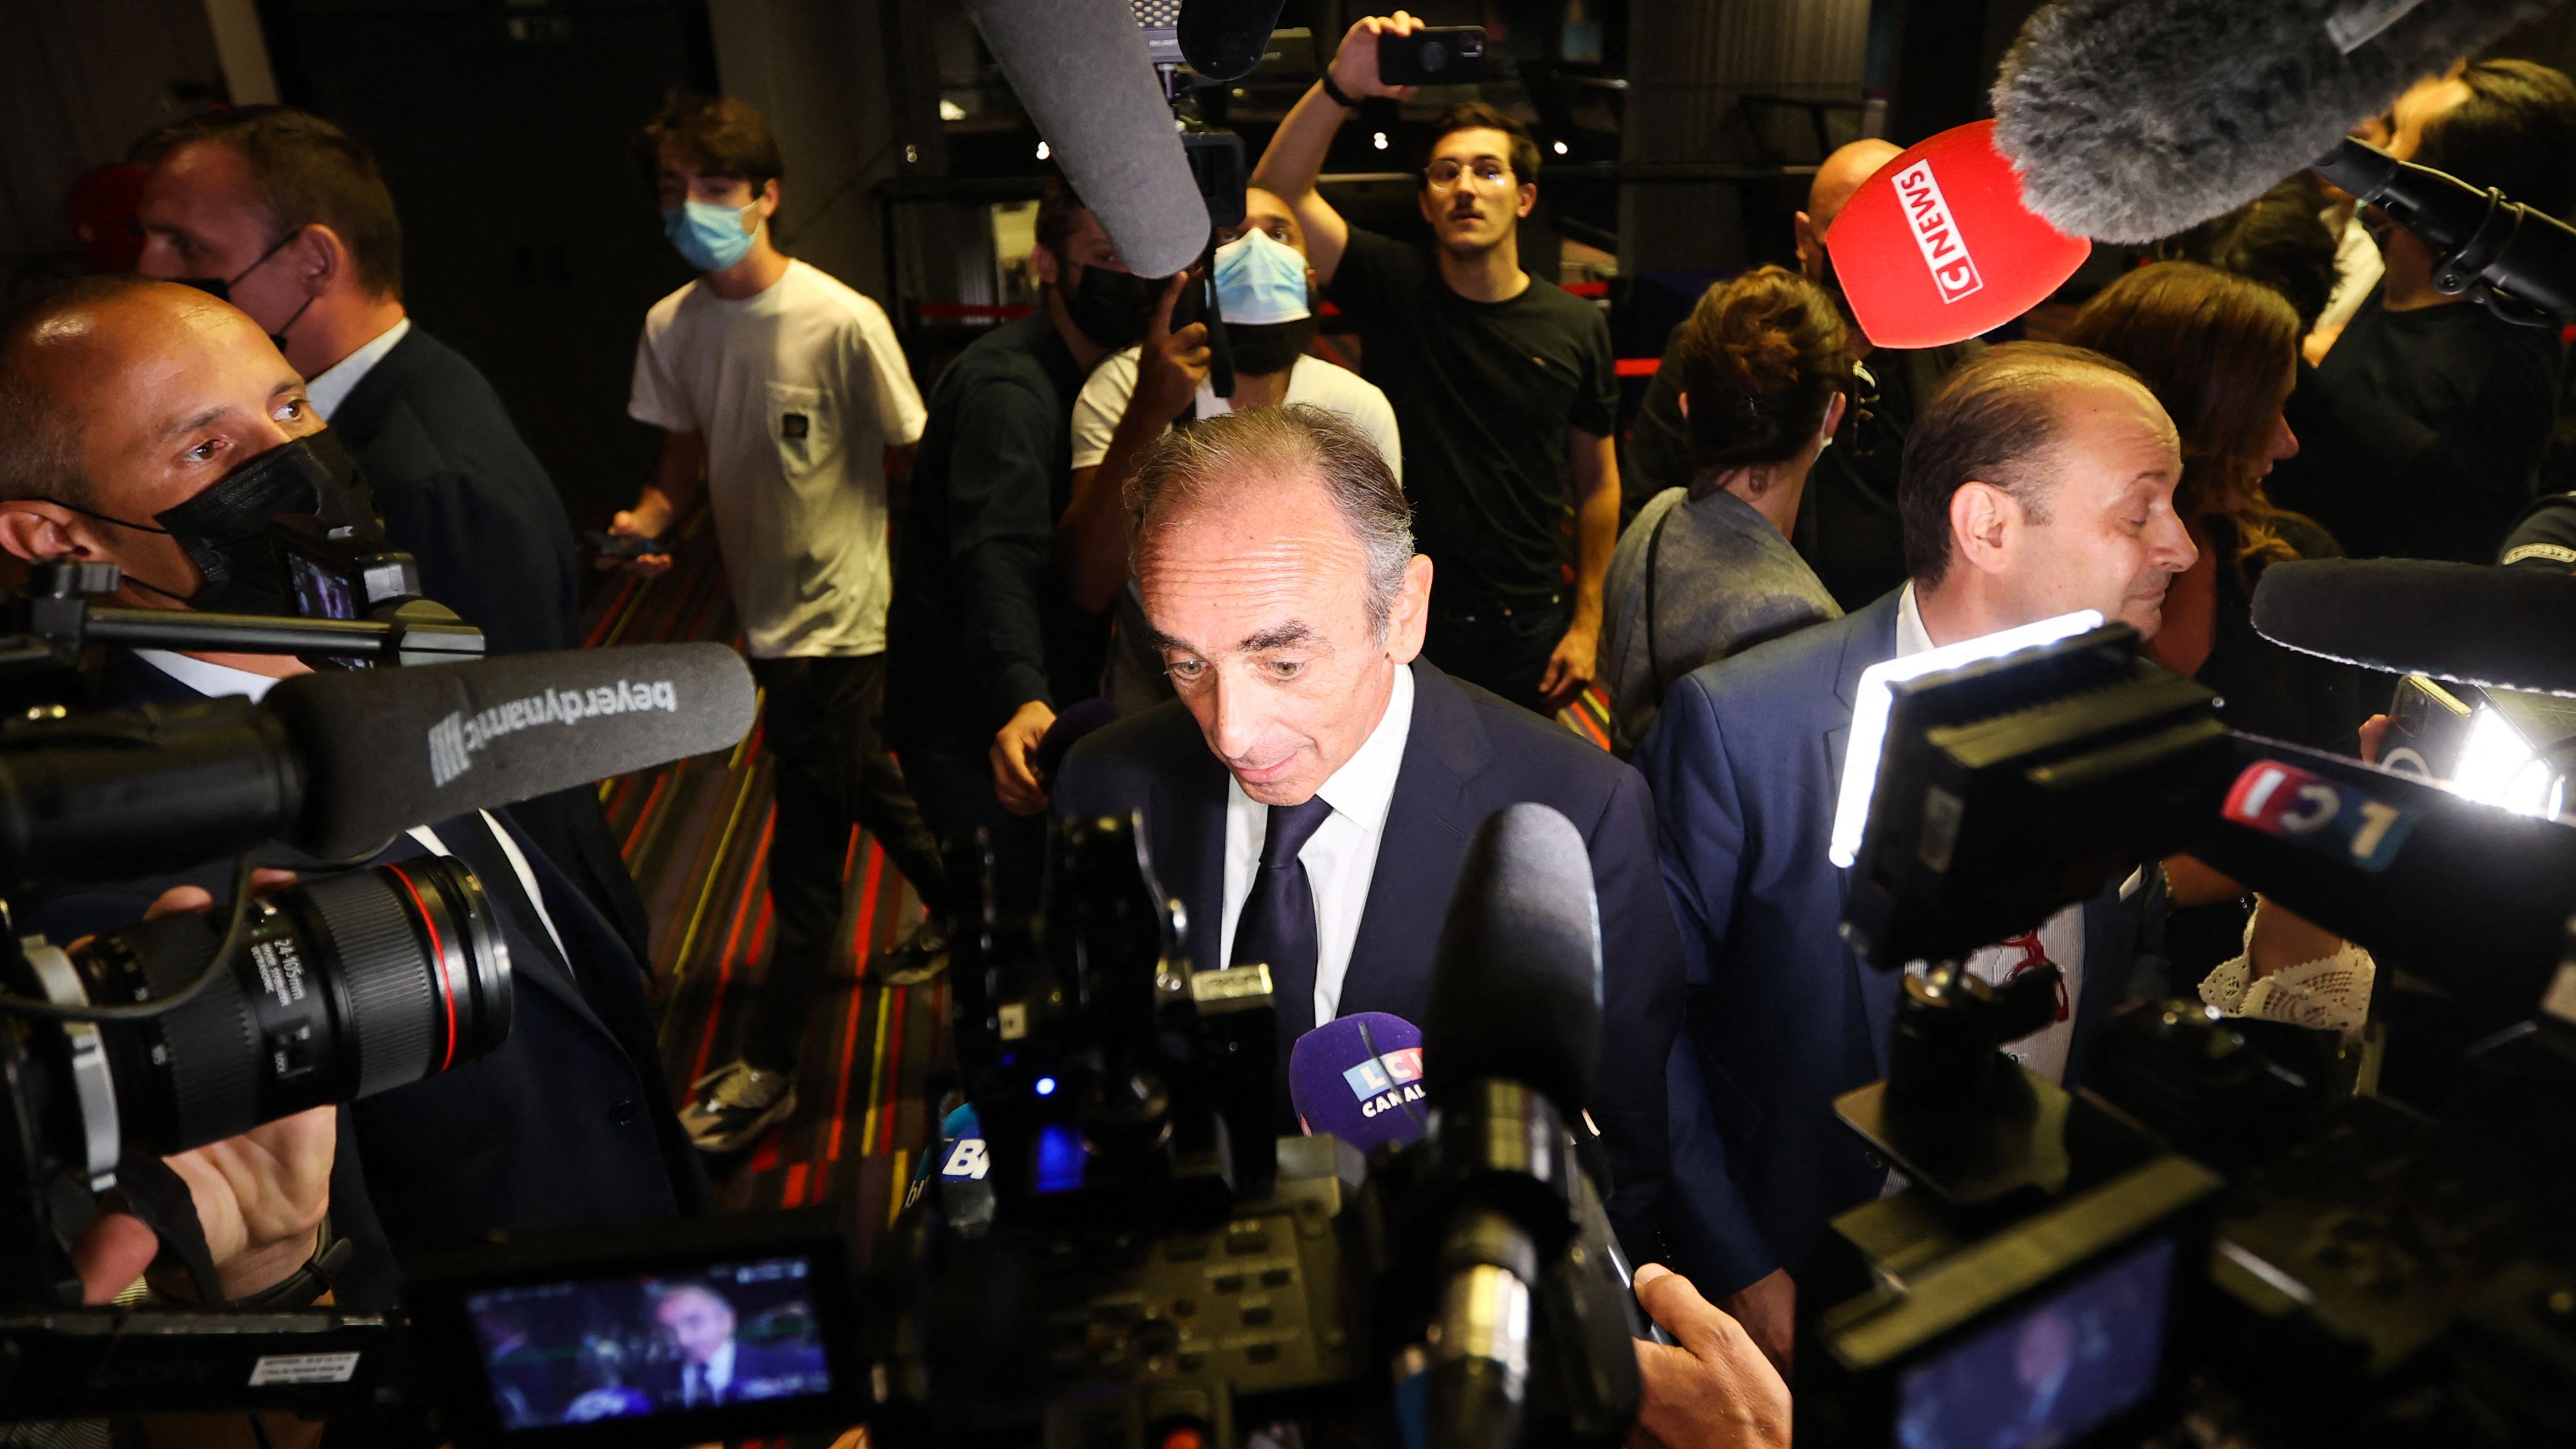 French television pundit and potential presidential candidate Eric Zemmour